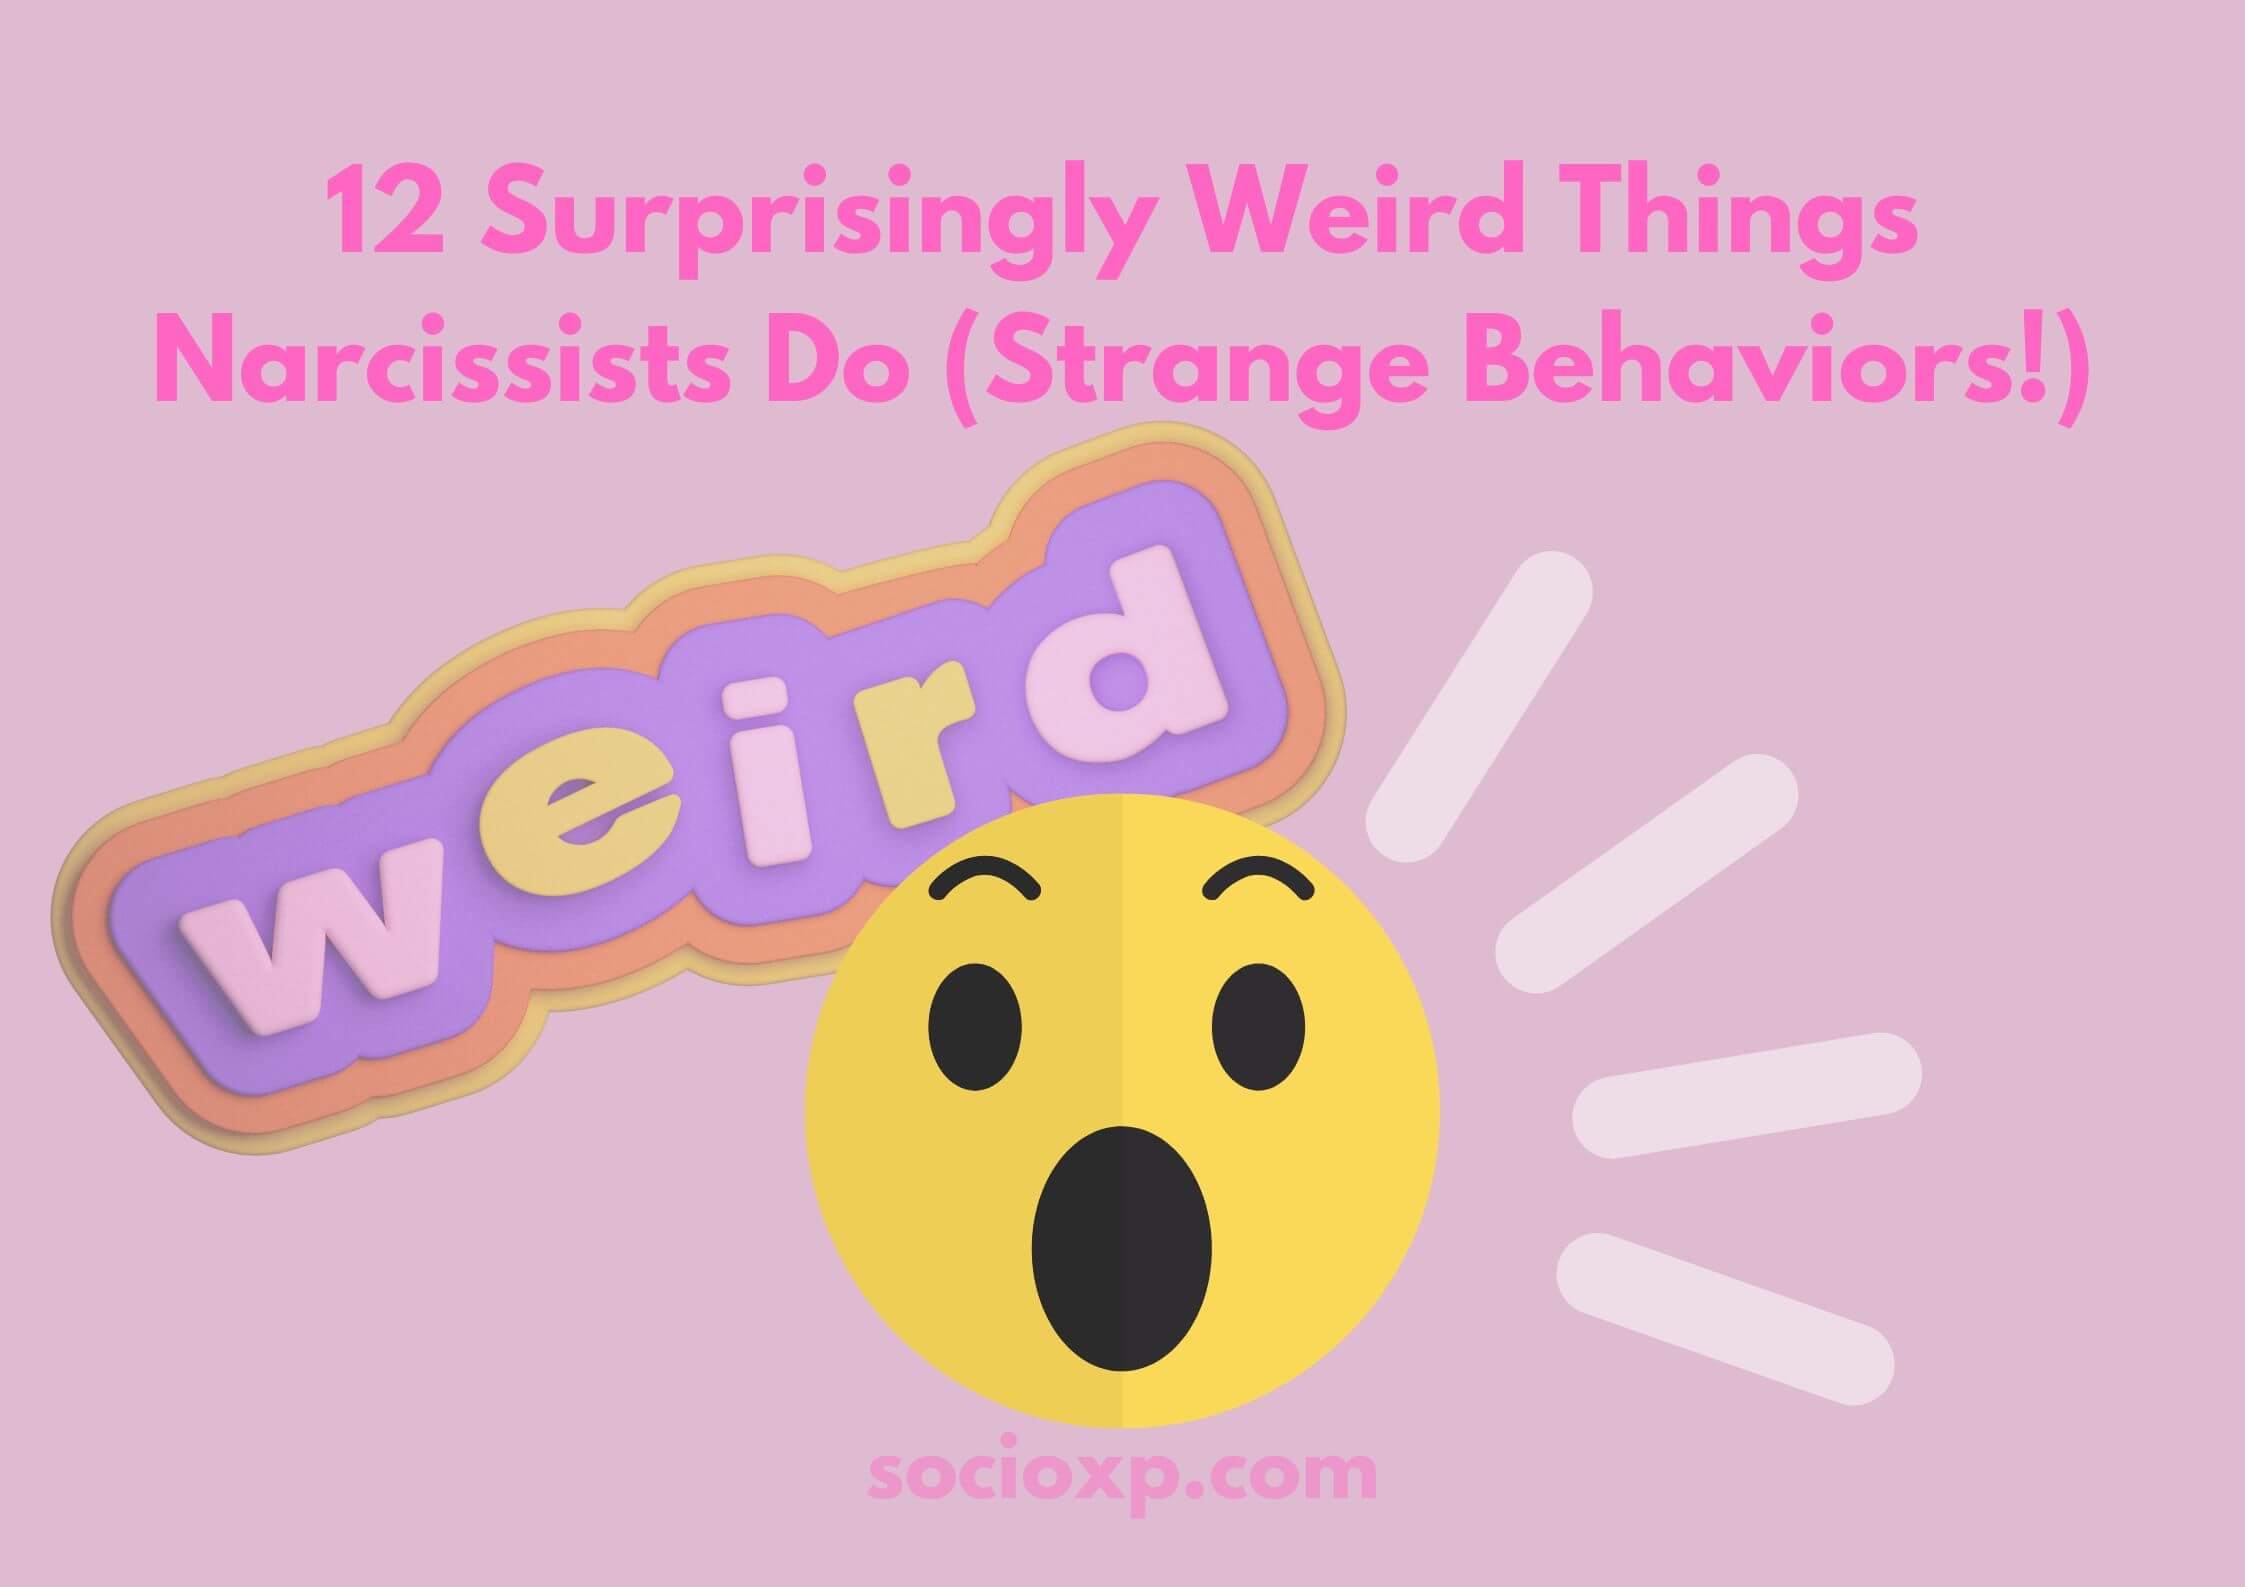 12 Surprisingly Weird Things Narcissists Do (Strange Behaviors!)